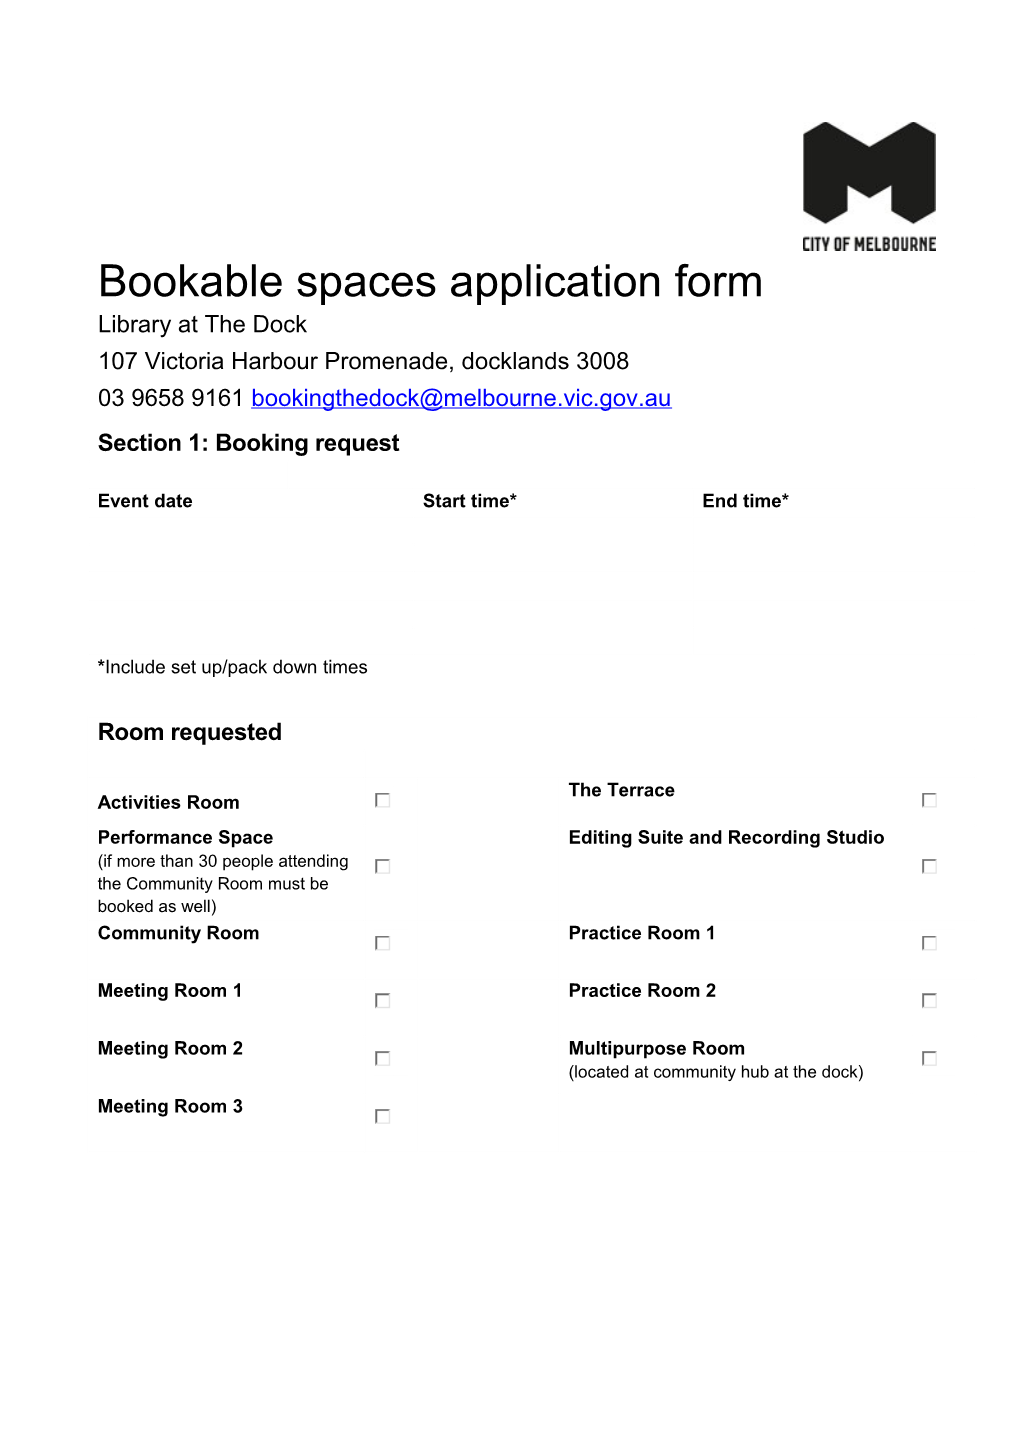 Bookable Spaces Application Form - Library at the Dock